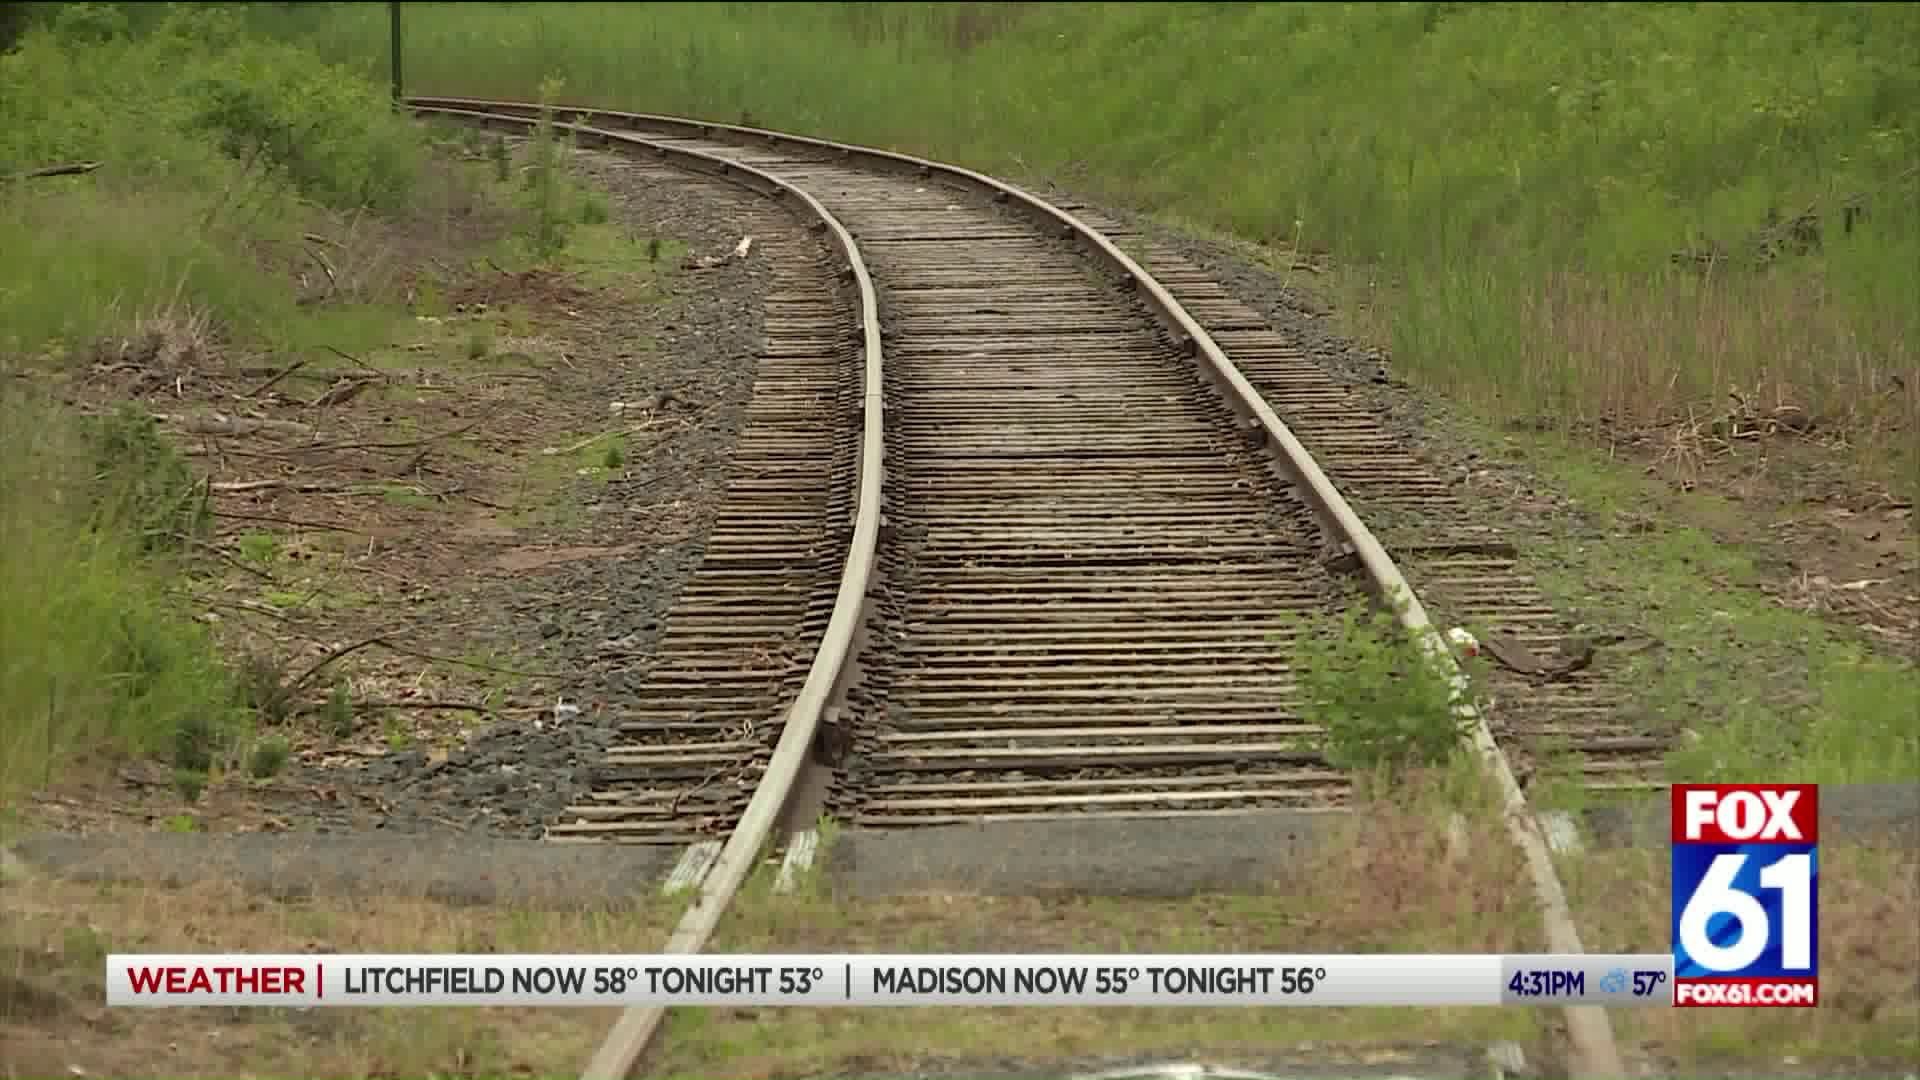 Wethersfield residents concerned after rail line re-opens after being dormant for over a decade..